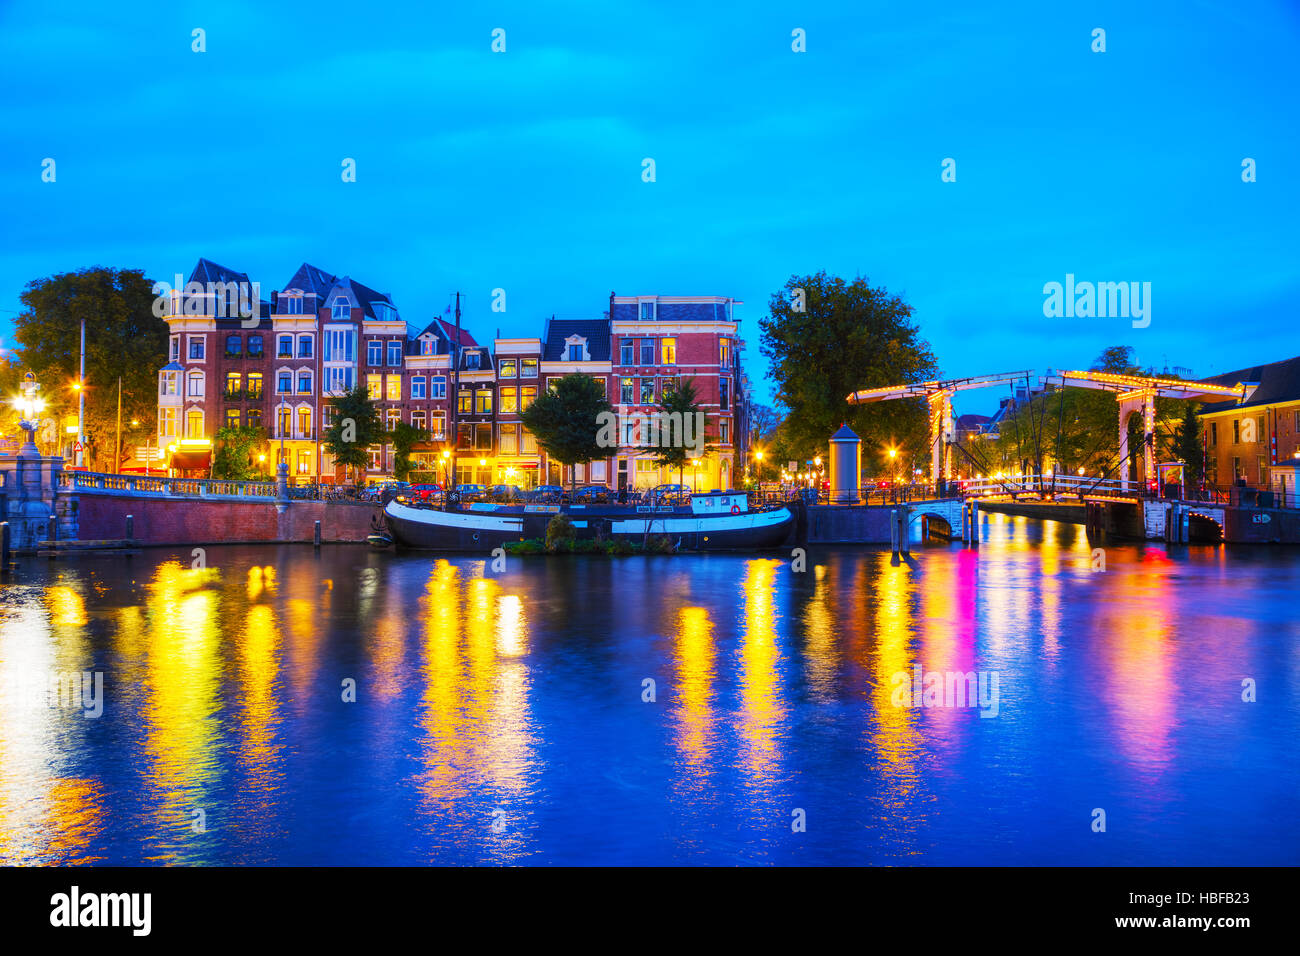 Amsterdam city view with canals and bridges at night Stock Photo